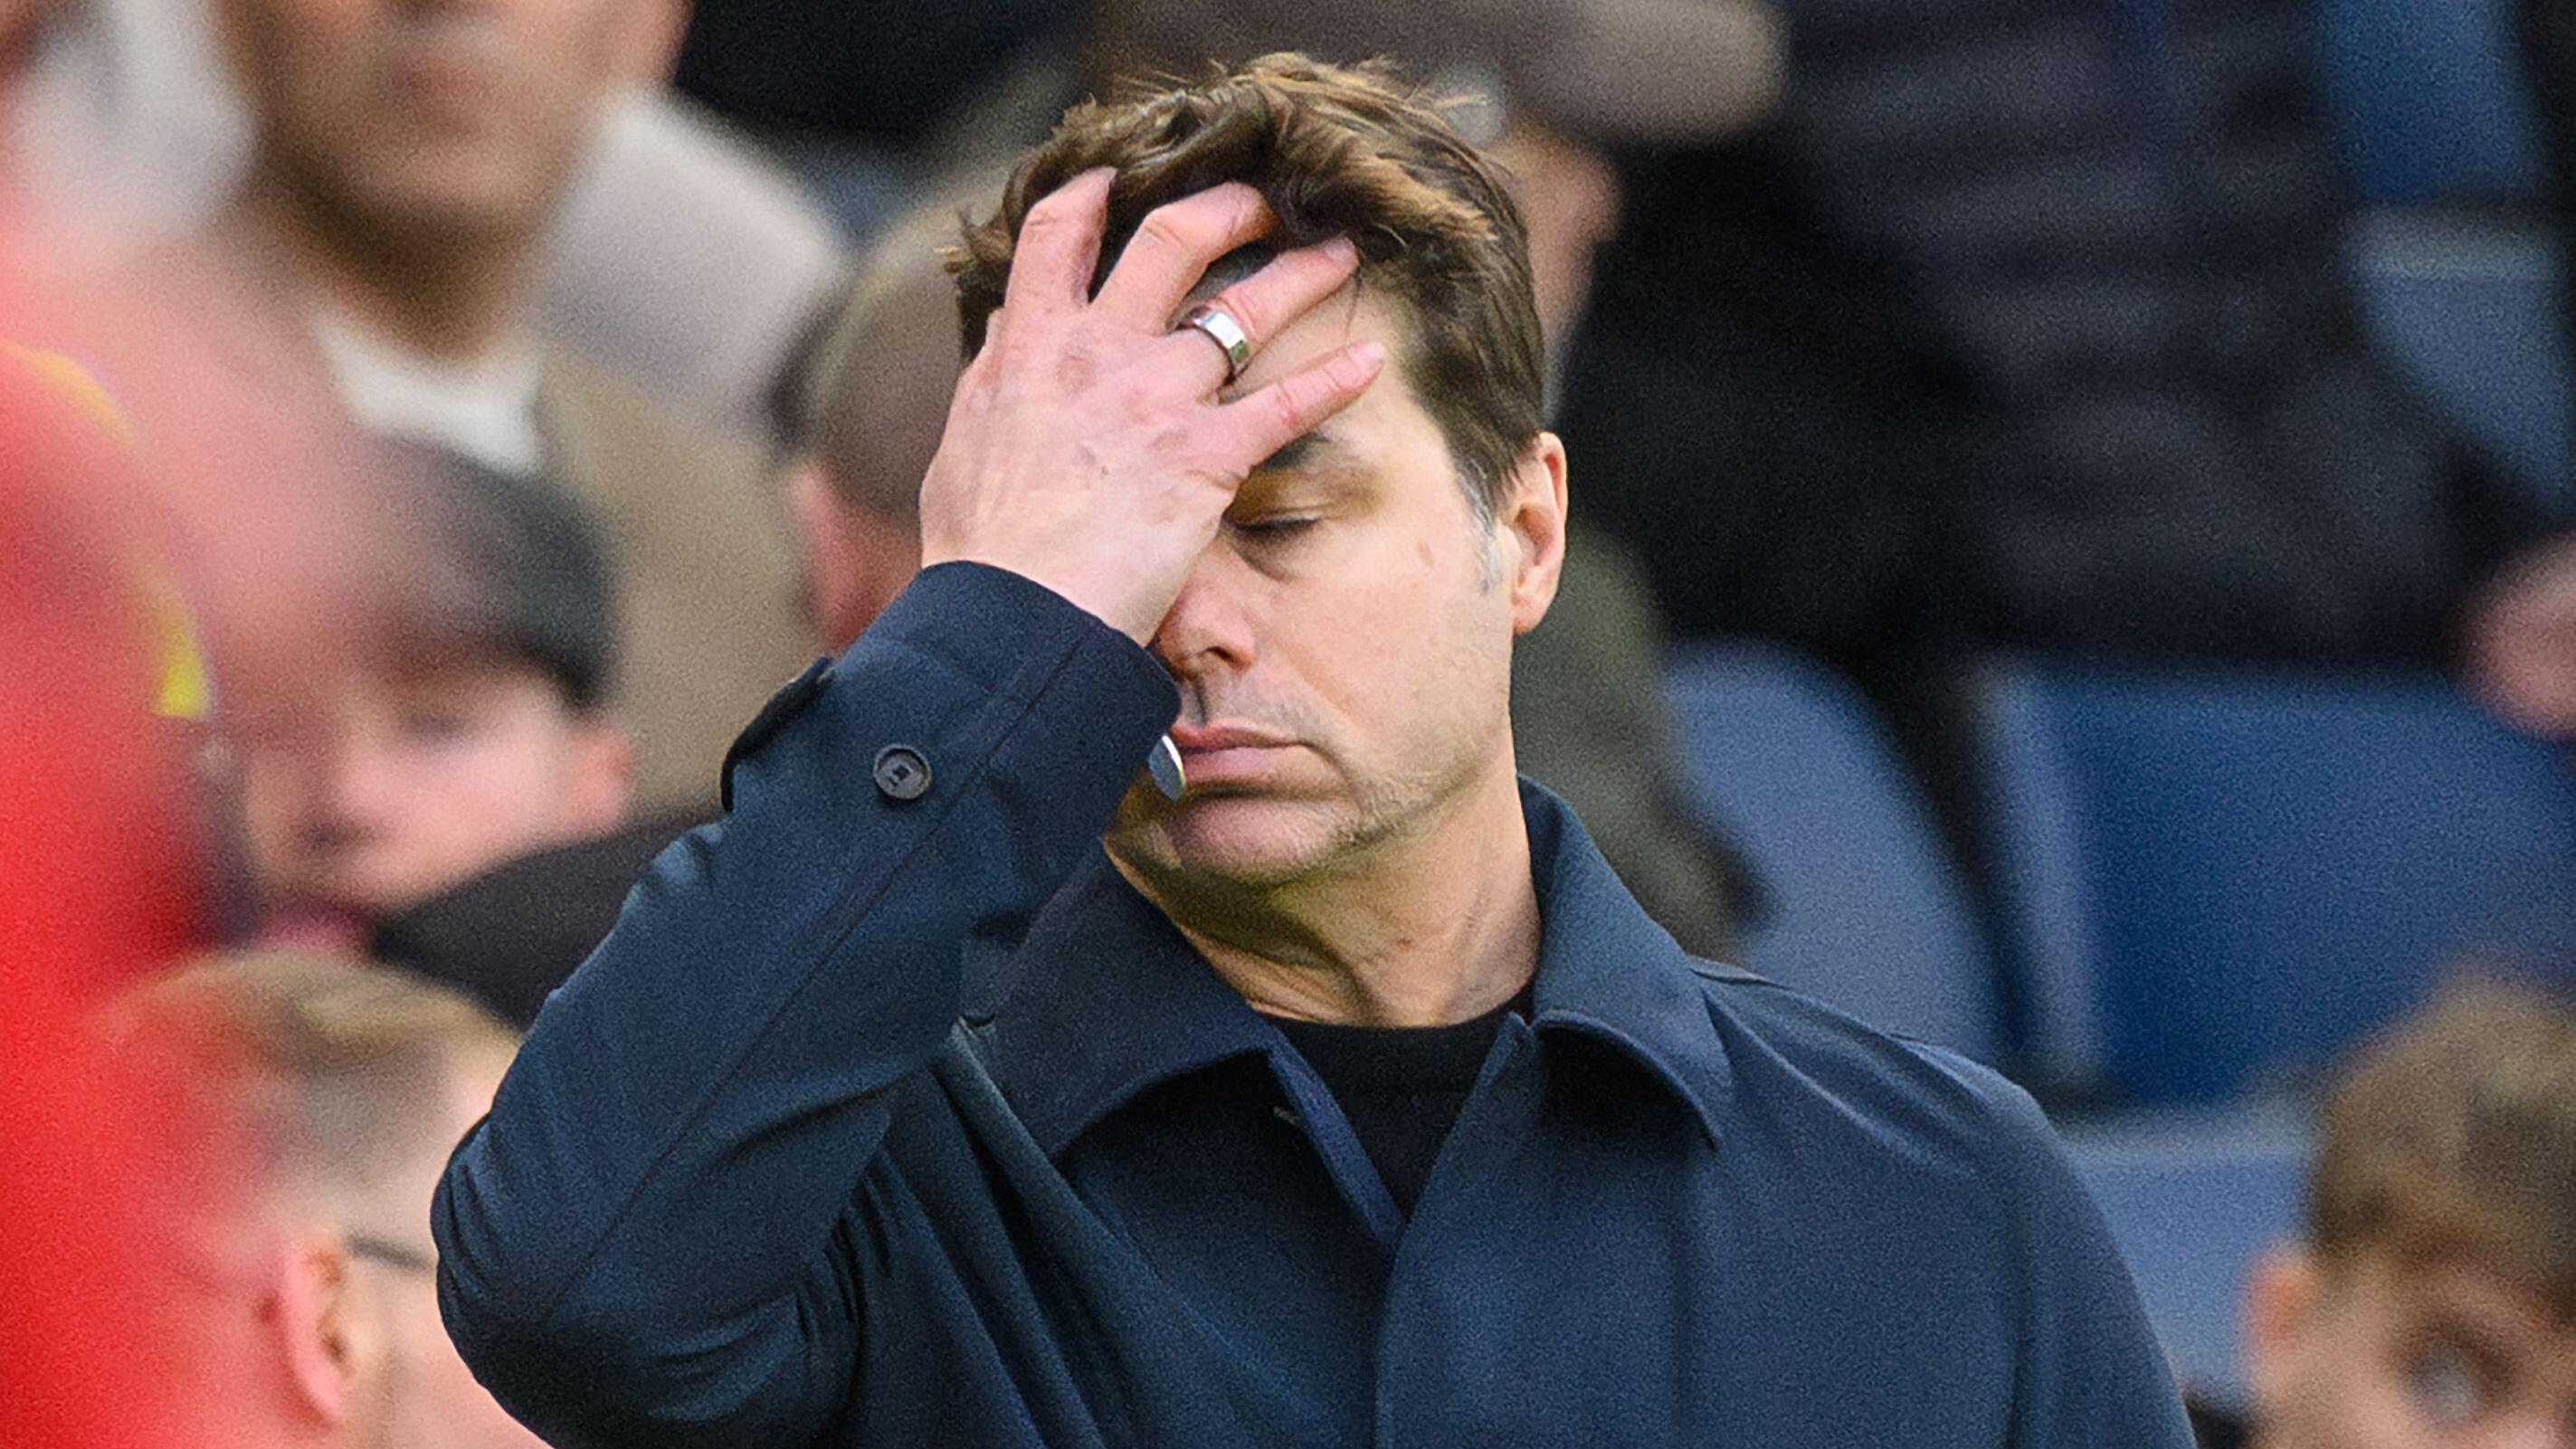 Pochettino insists he is not solely to blame for Chelsea’s chaotic season amid speculation around his future at the club